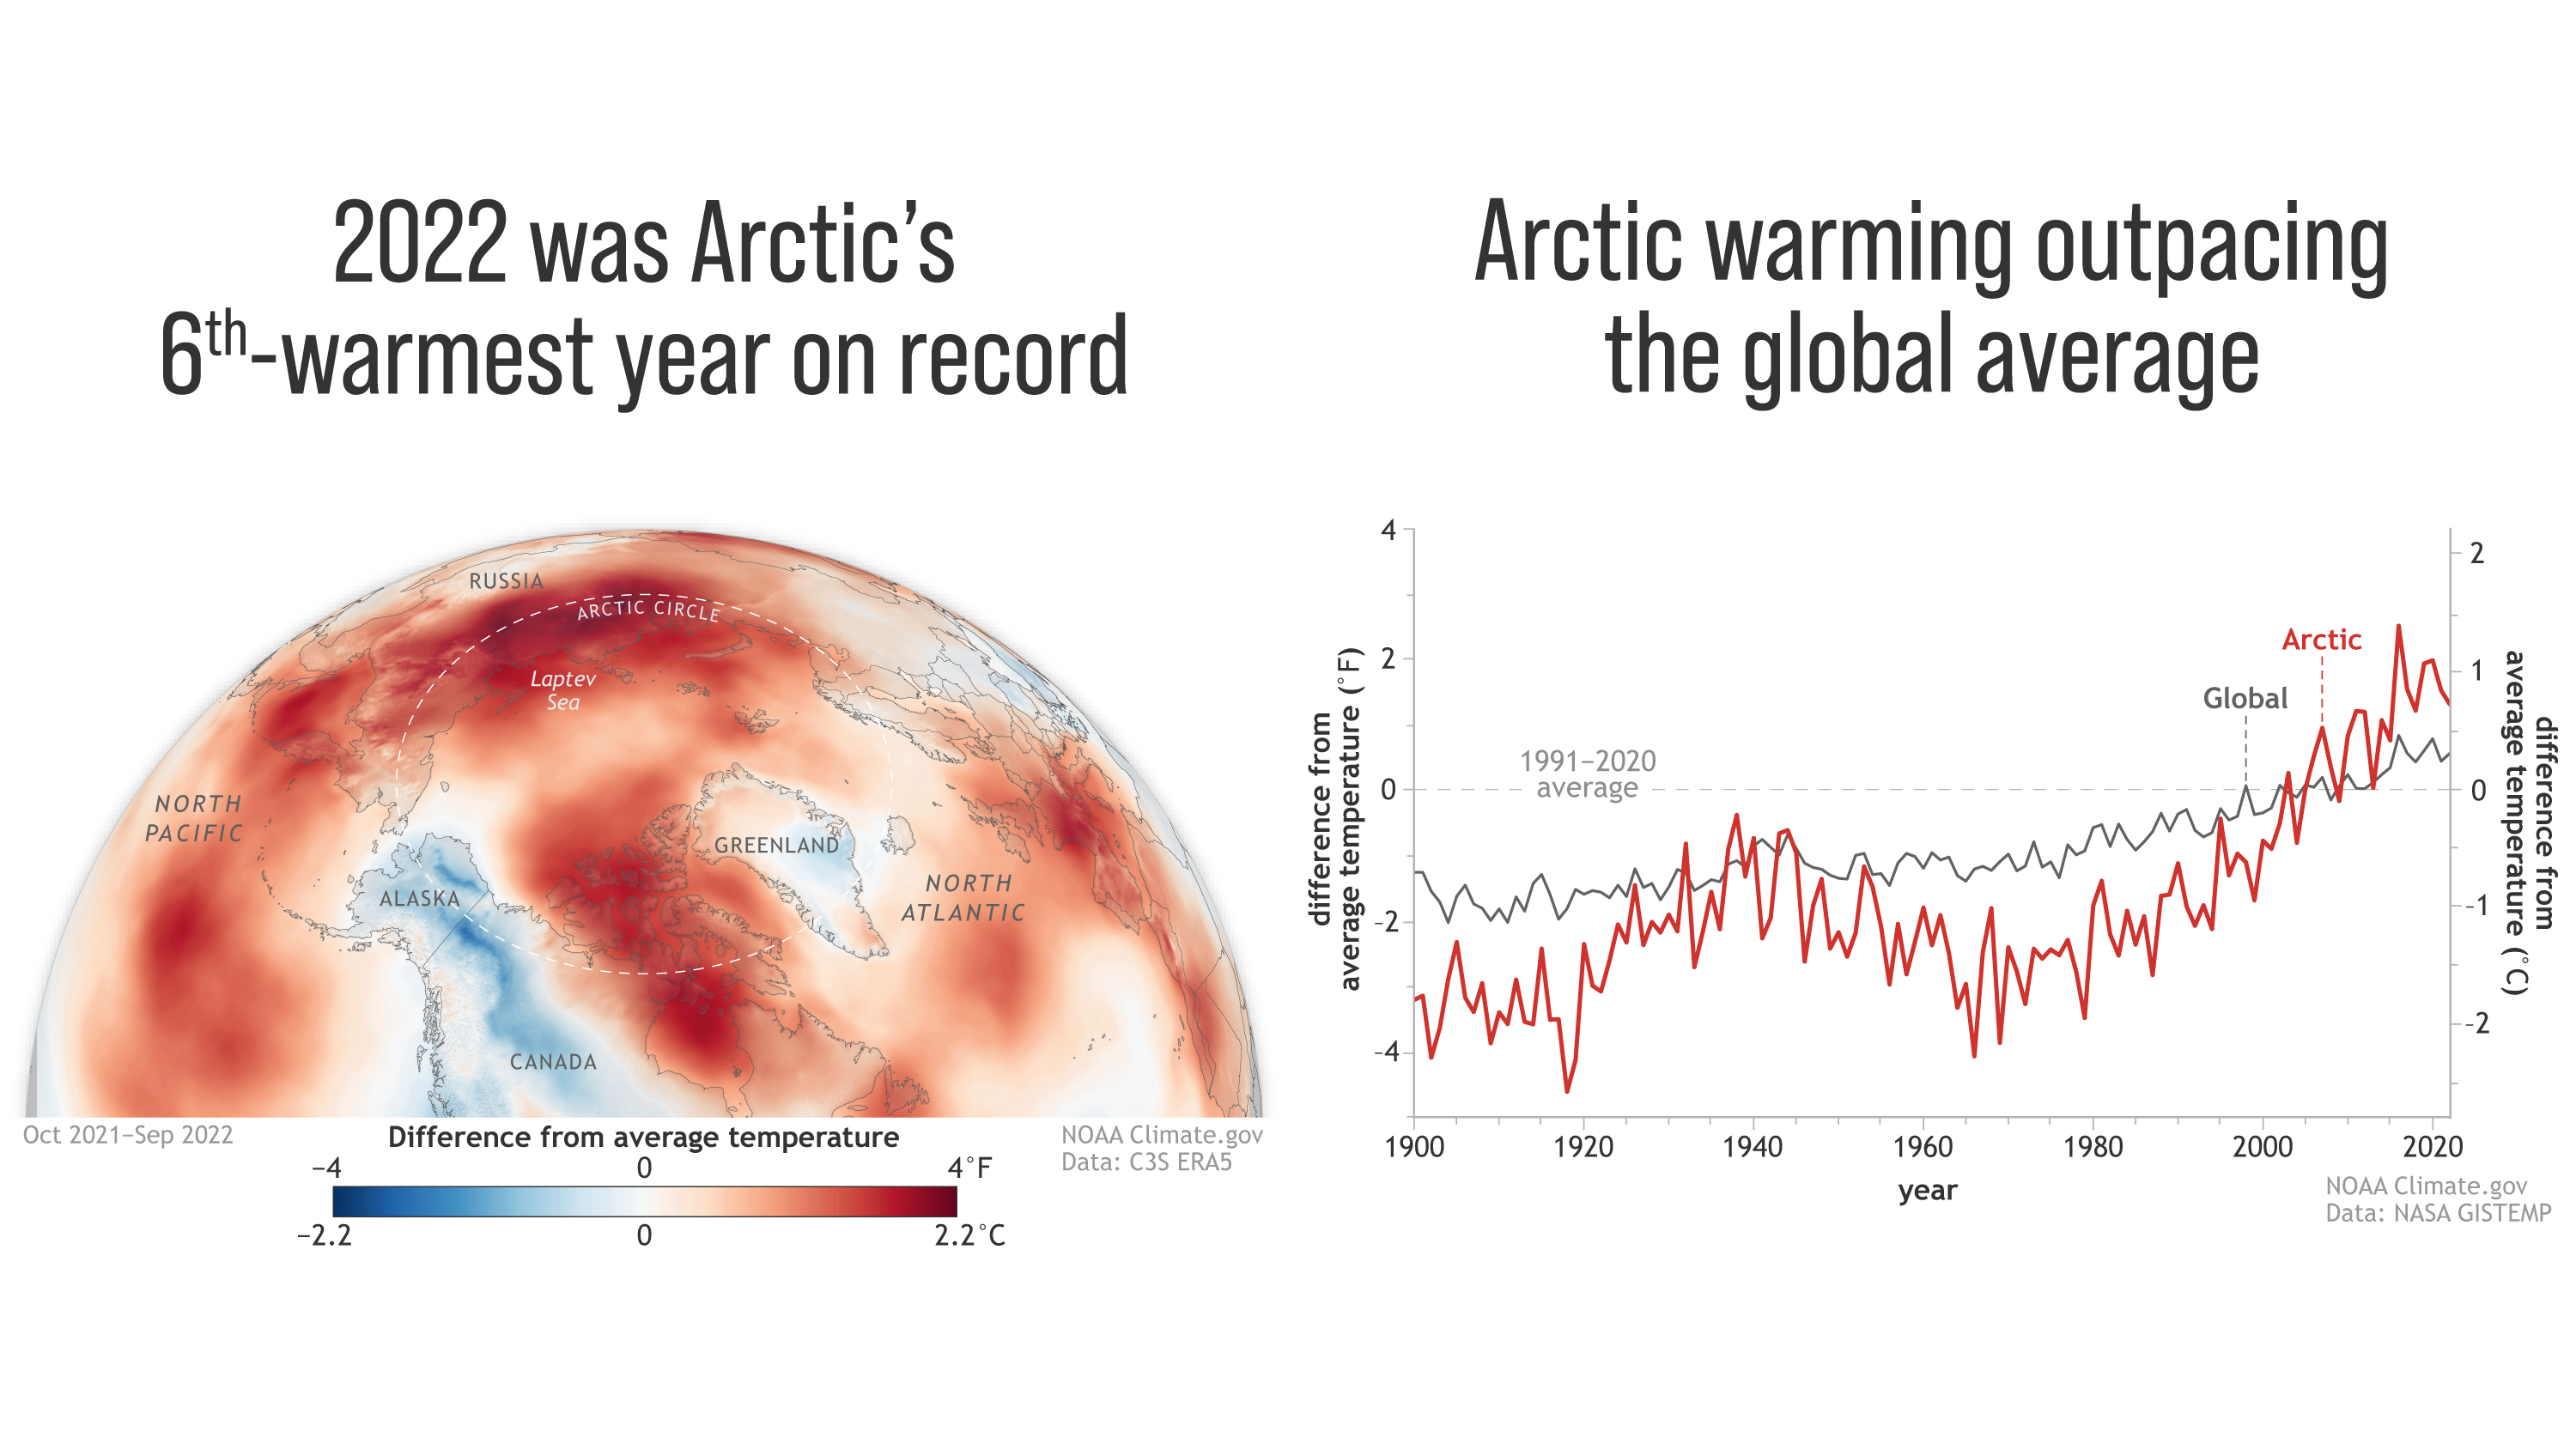 Arctic annual air surface temperatures from October 2021 to September 2022 were the sixth warmest dating back to 1900. The image on the left depicts the departure from the average near-surface temperature across the Arctic during this period, with redder colors showing areas of greater than average warmth. The graphic on the right shows how the rate of Arctic air temperature warming has outpaced the rate of global warming. Data: ERA5 and NASA. Graphic: NOAA / Climate.gov